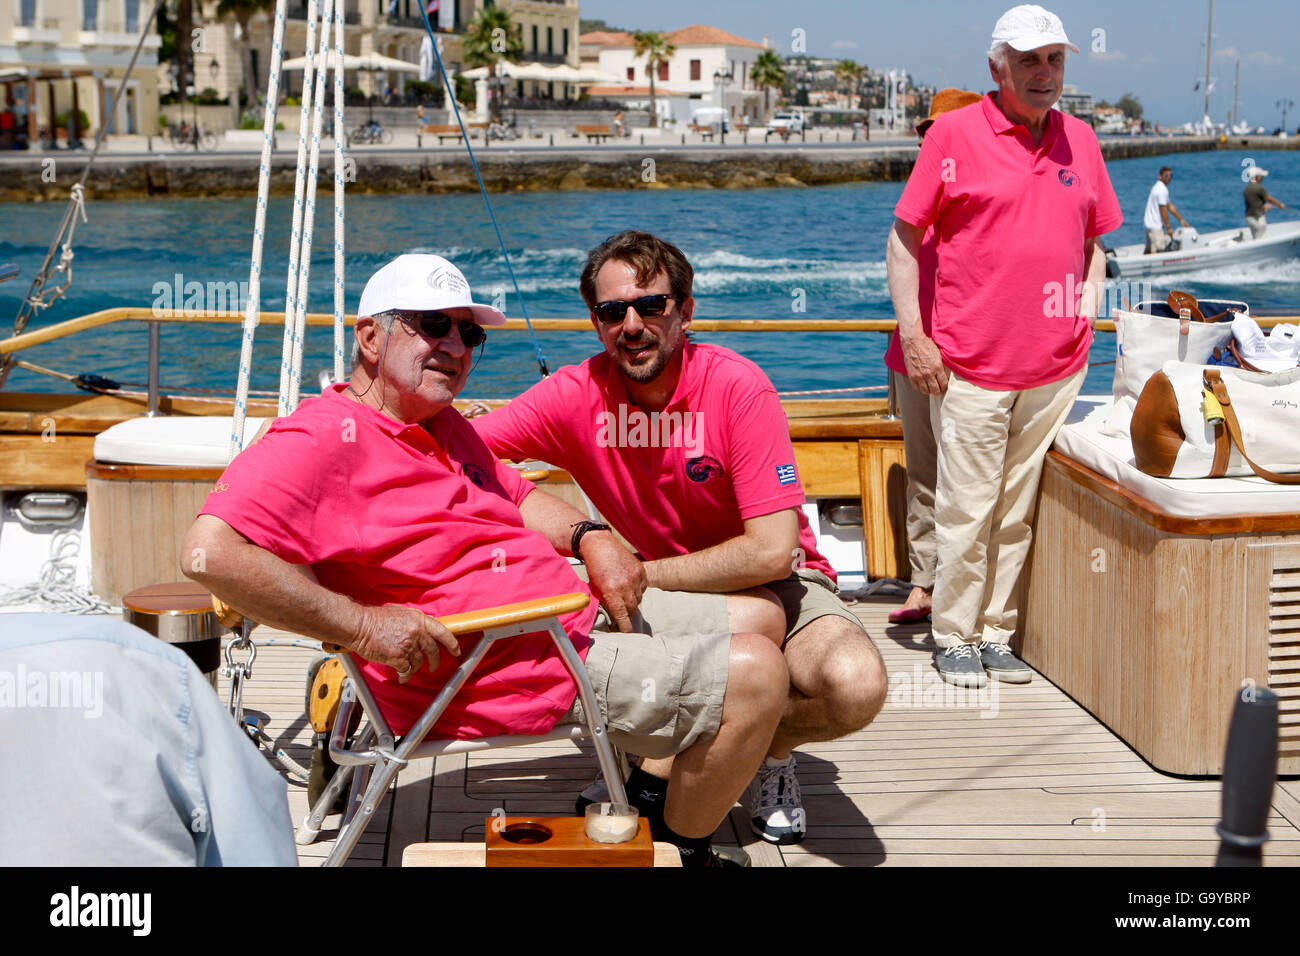 Spetses Island, Greece. 1st July, 2016. King CONSTANTINE of Greece with his son Prince NIKOLAOS of Greece participate with their traditional boat Afroessa, at Spetses Classic Yacht Regatta 2016. © Aristidis Vafeiadakis/ZUMA Wire/Alamy Live News Stock Photo